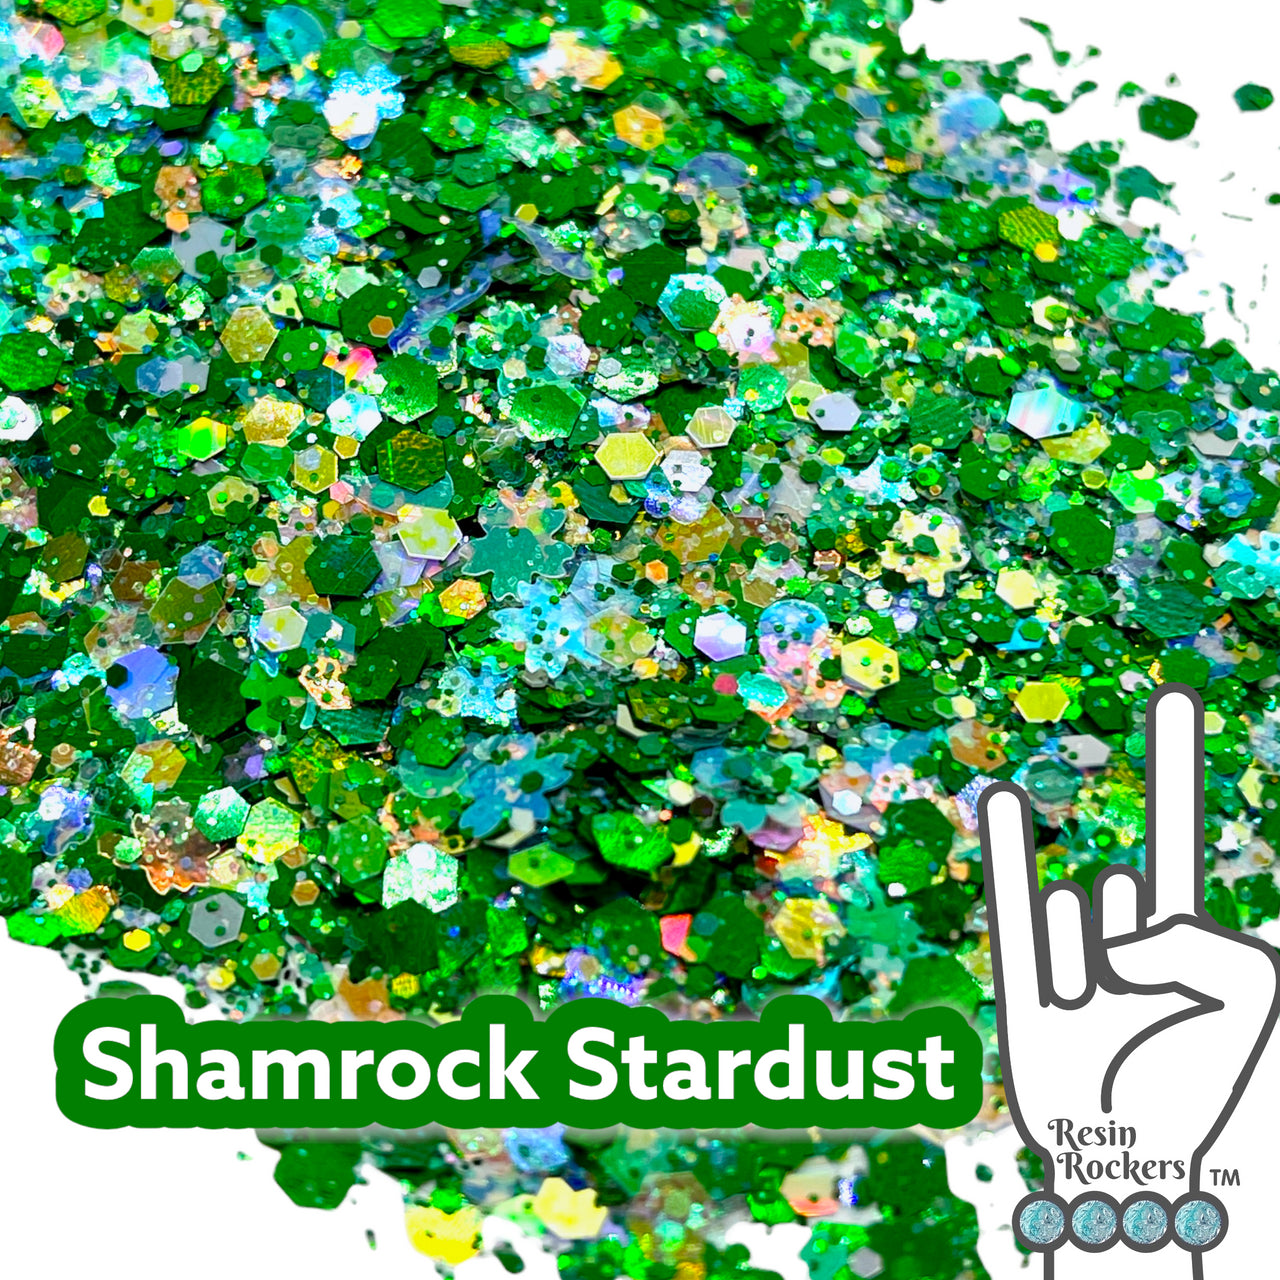 Shamrock Stardust Premium Pixie for Poxy Limited Edition Chunky Glitter Mix